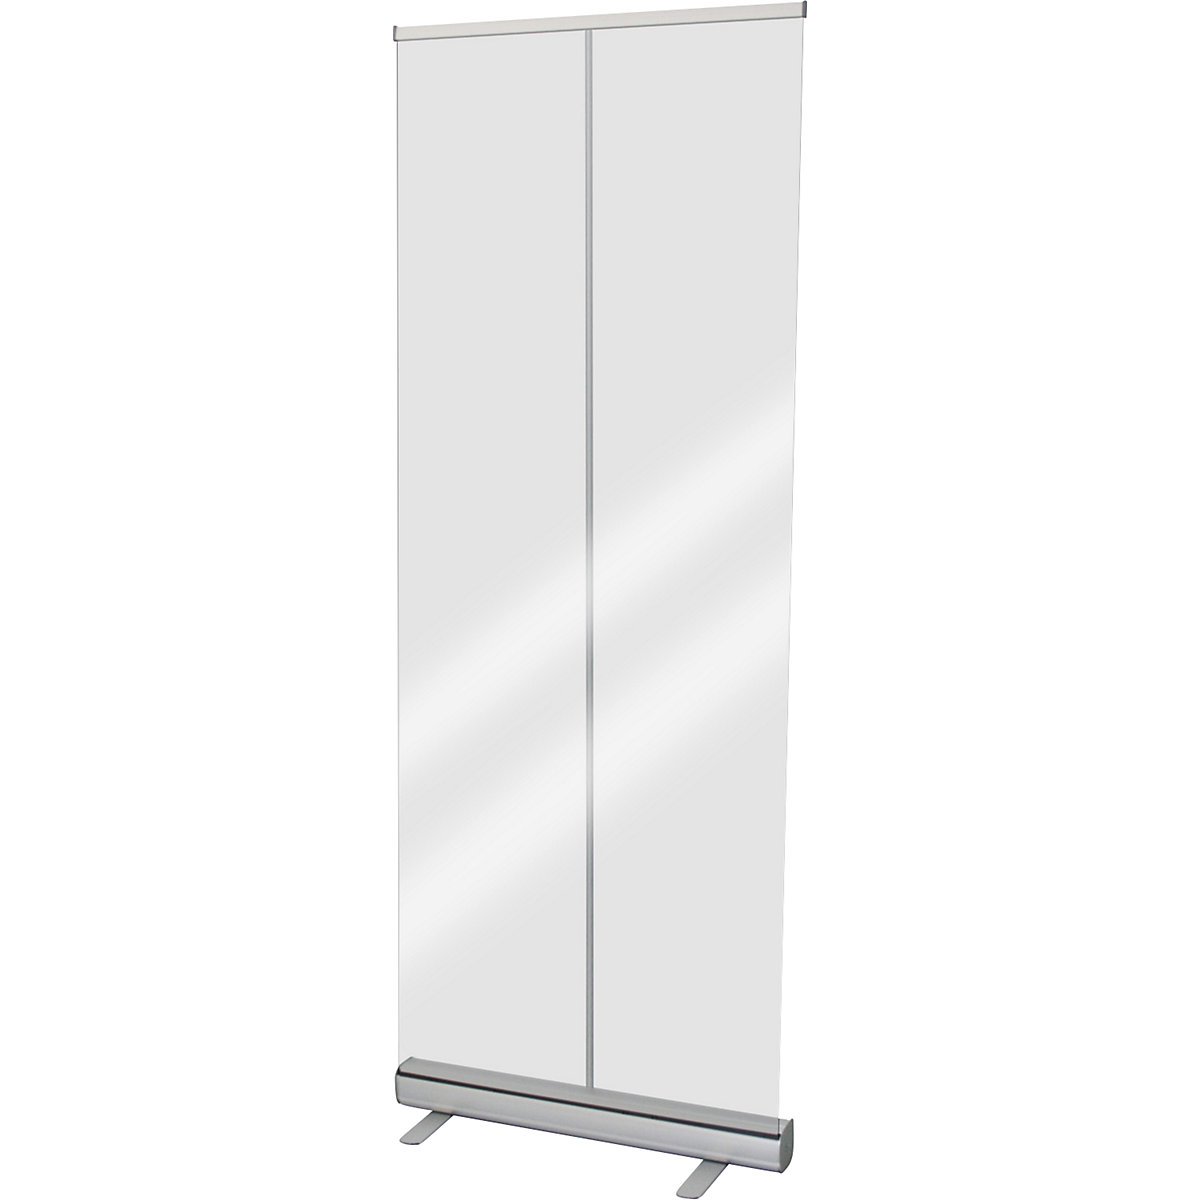 Roll-up hygiene protection partition